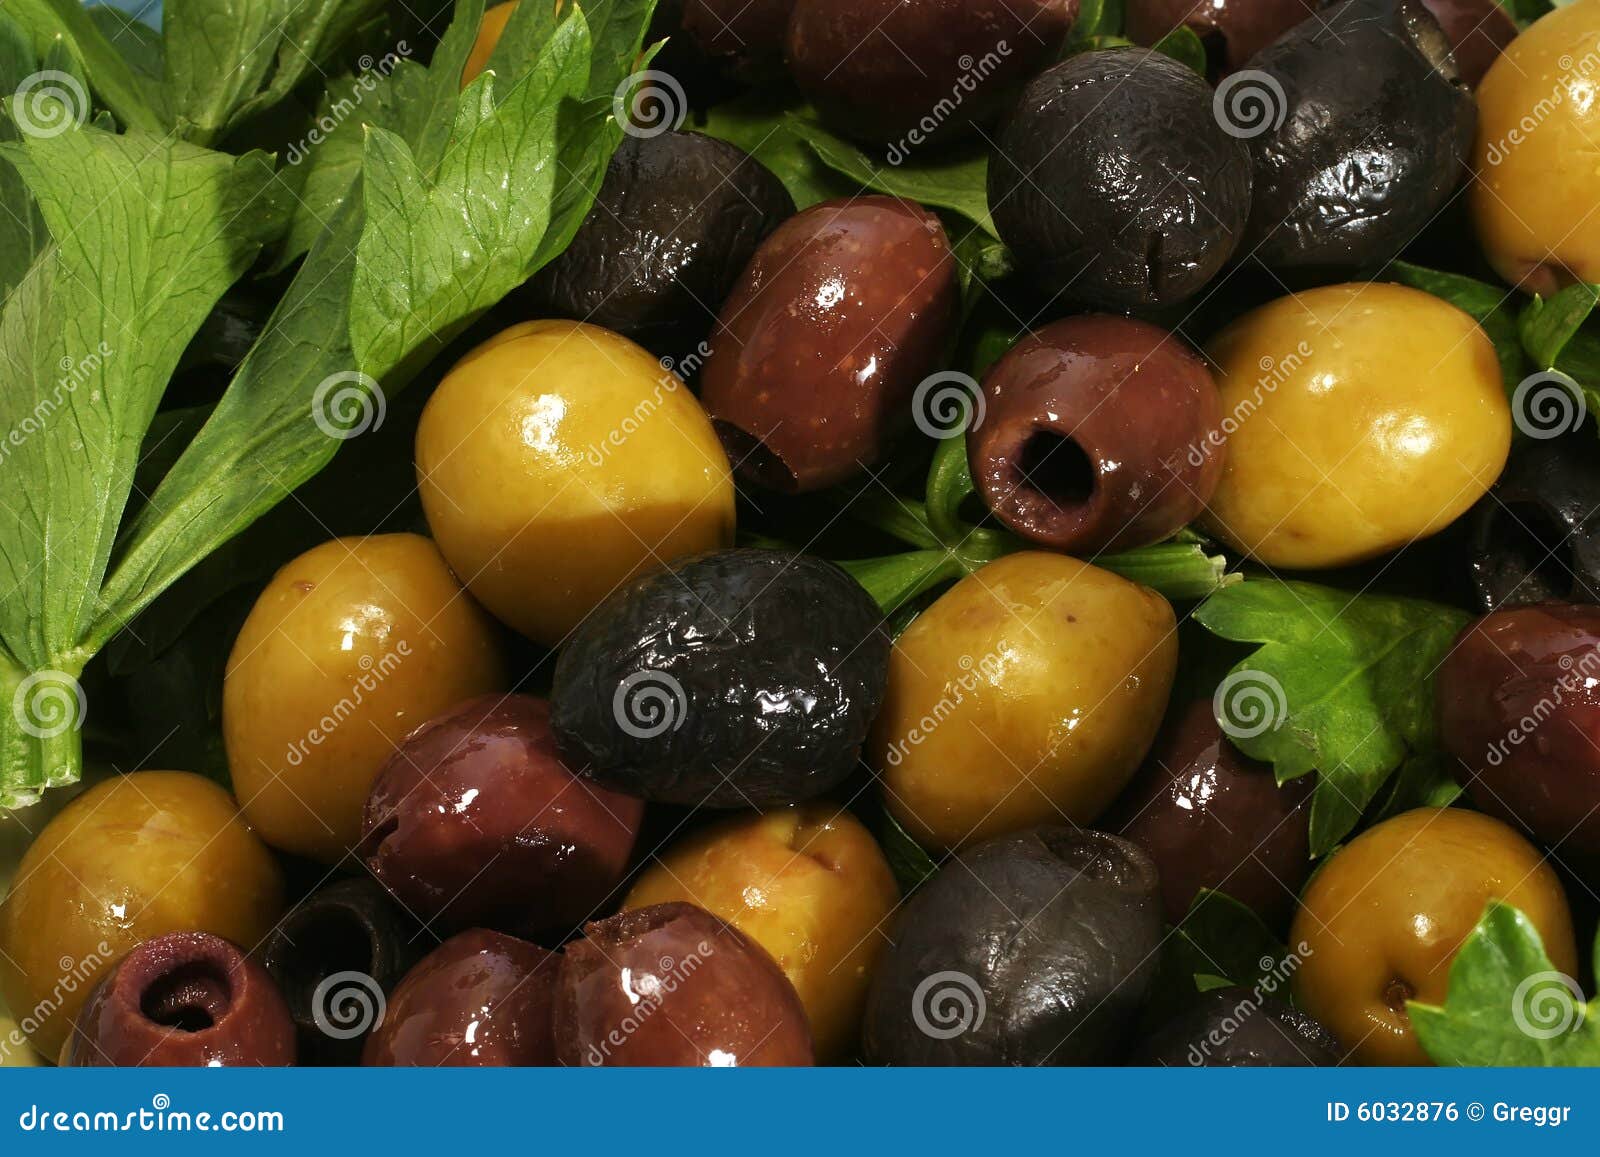 Are Olives a Vegetable?, Different varieties